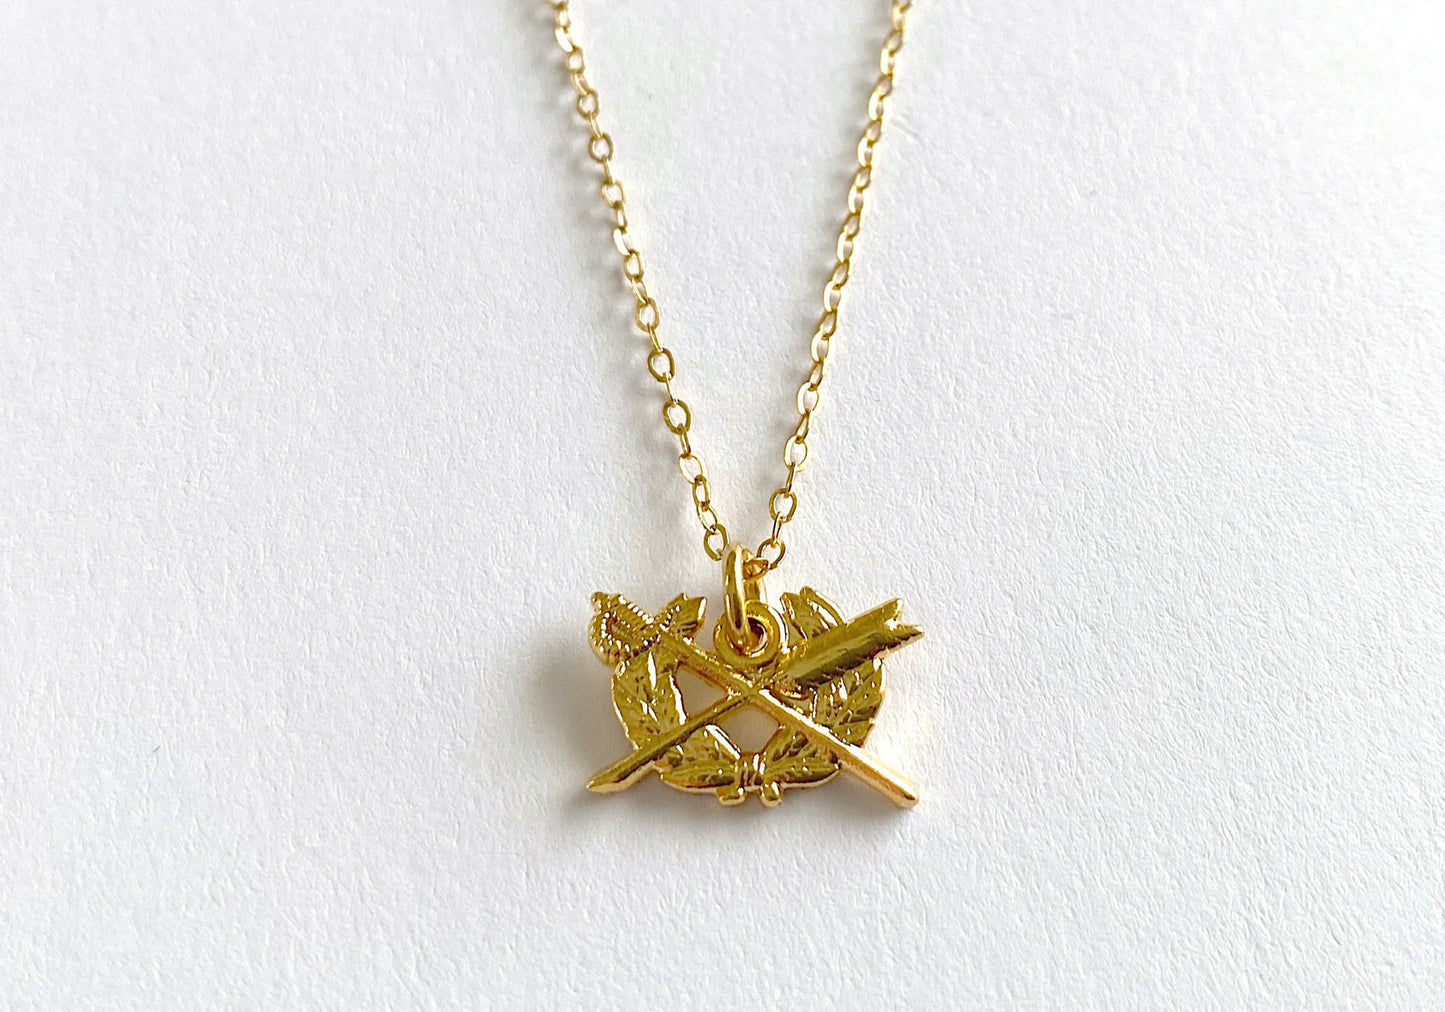 Judge Advocate General's Corps (JAG) Charm Necklace